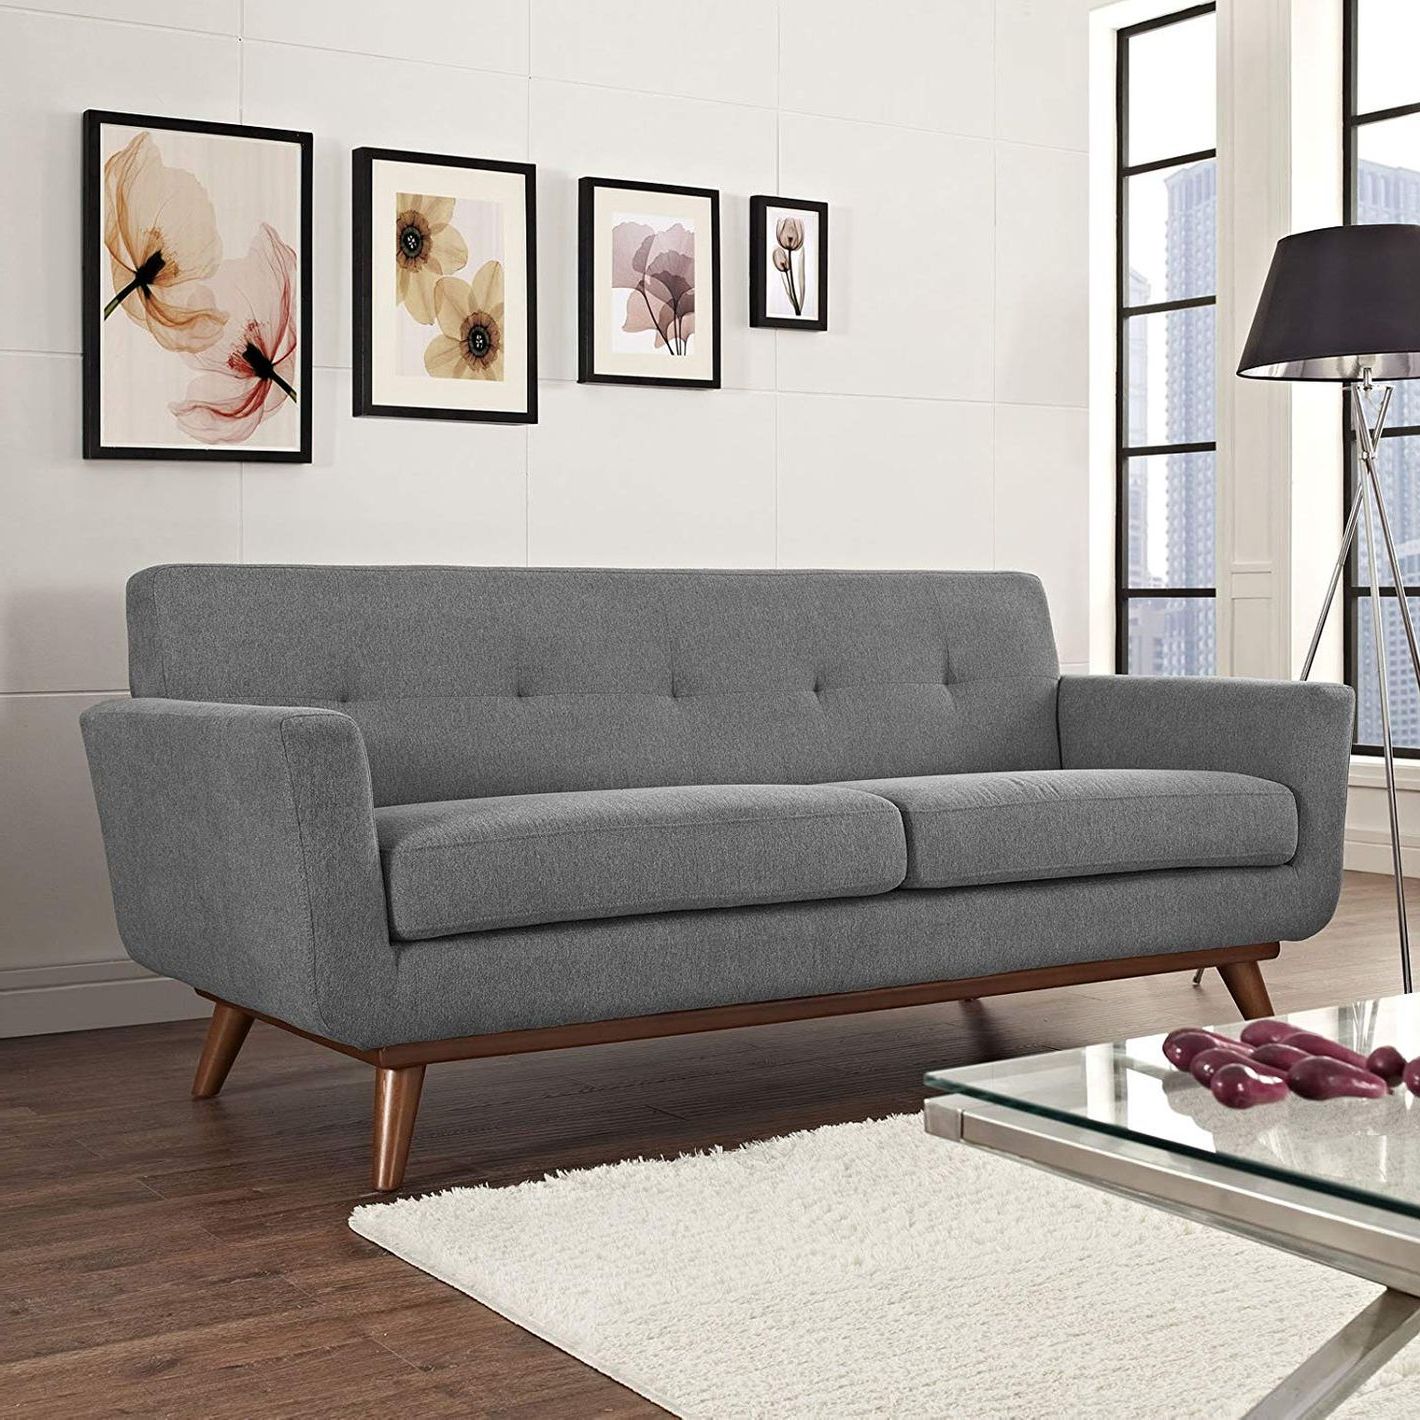 8 Best Love Seats 2021 | The Strategist With Regard To Modern Loveseat Sofas (Gallery 2 of 20)